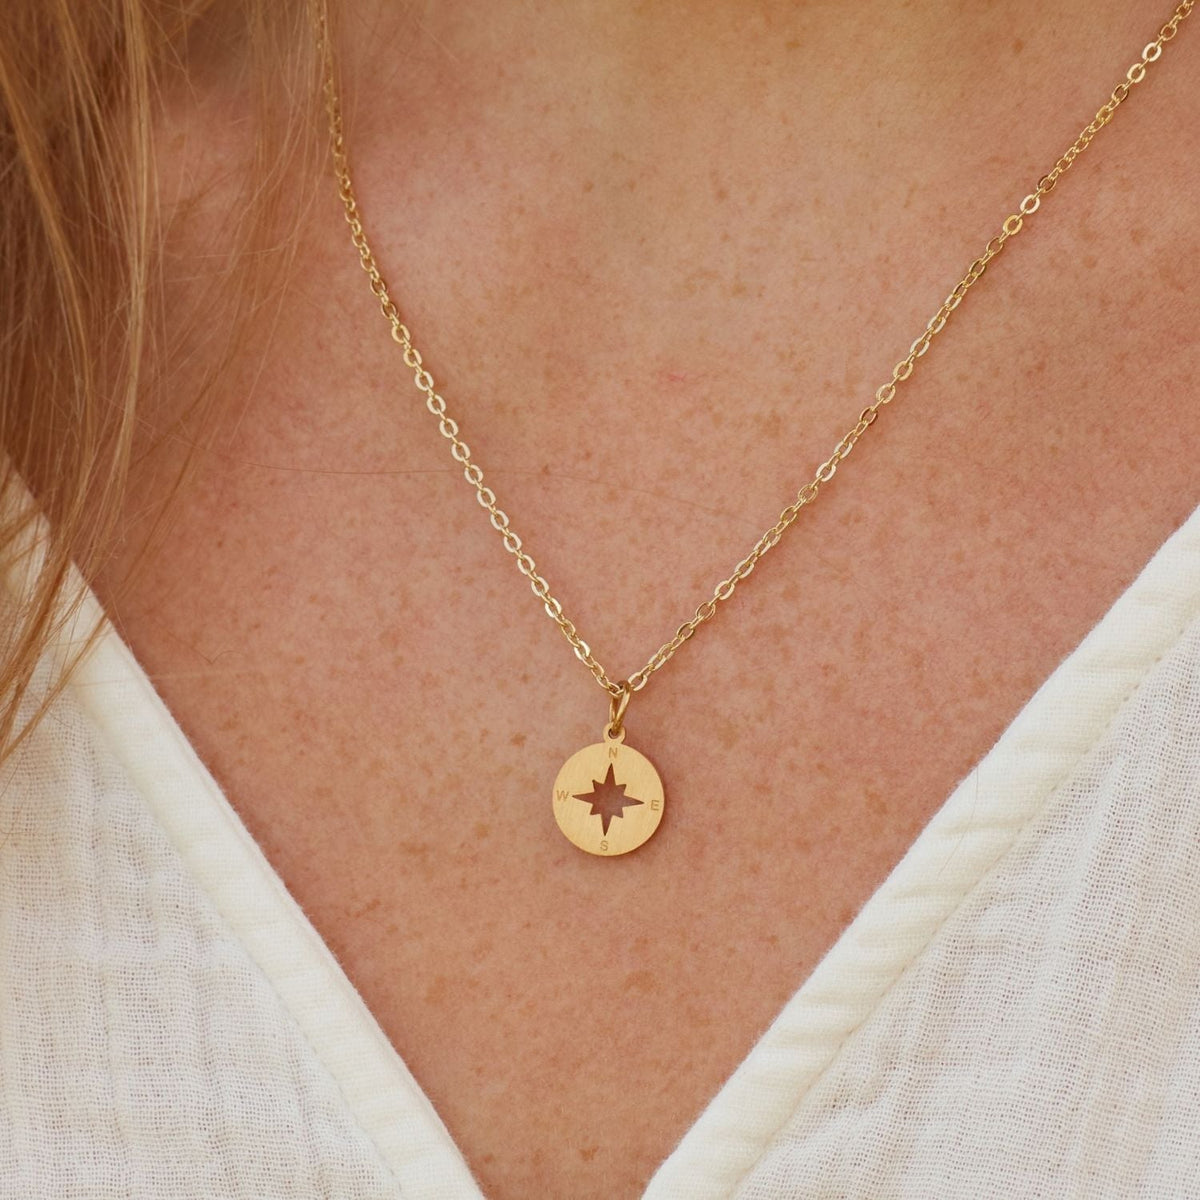 My Beautiful Daughter | Have Faith in God | Compass Necklace